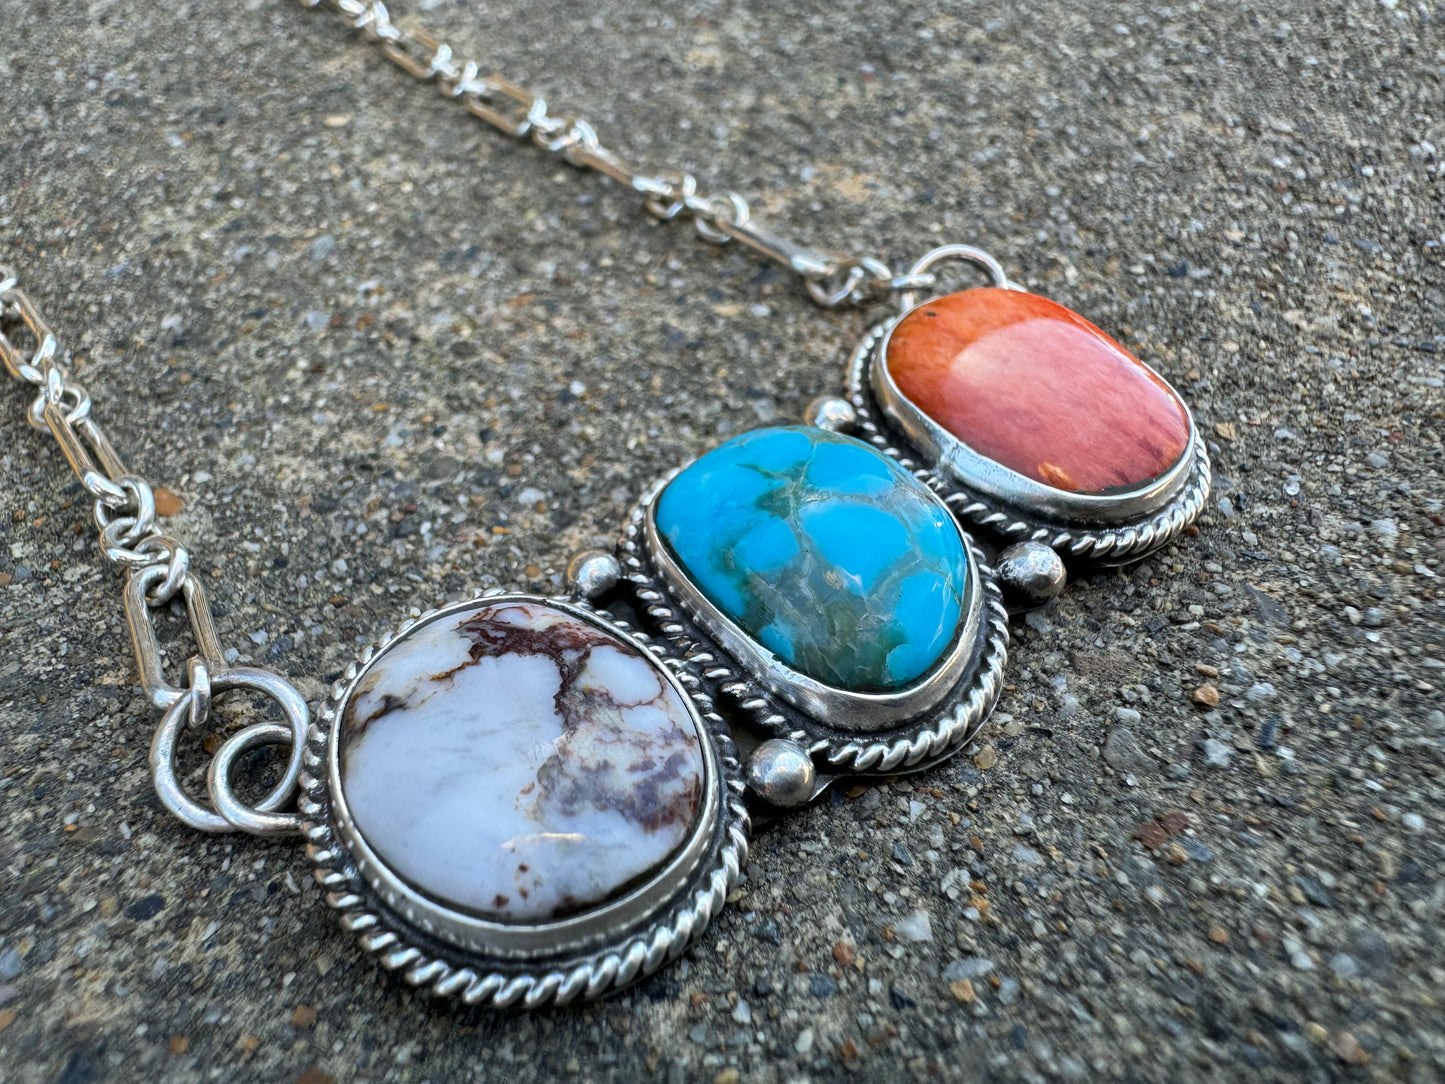 Three stone turquoise, spiny oyster and wild horse Necklace